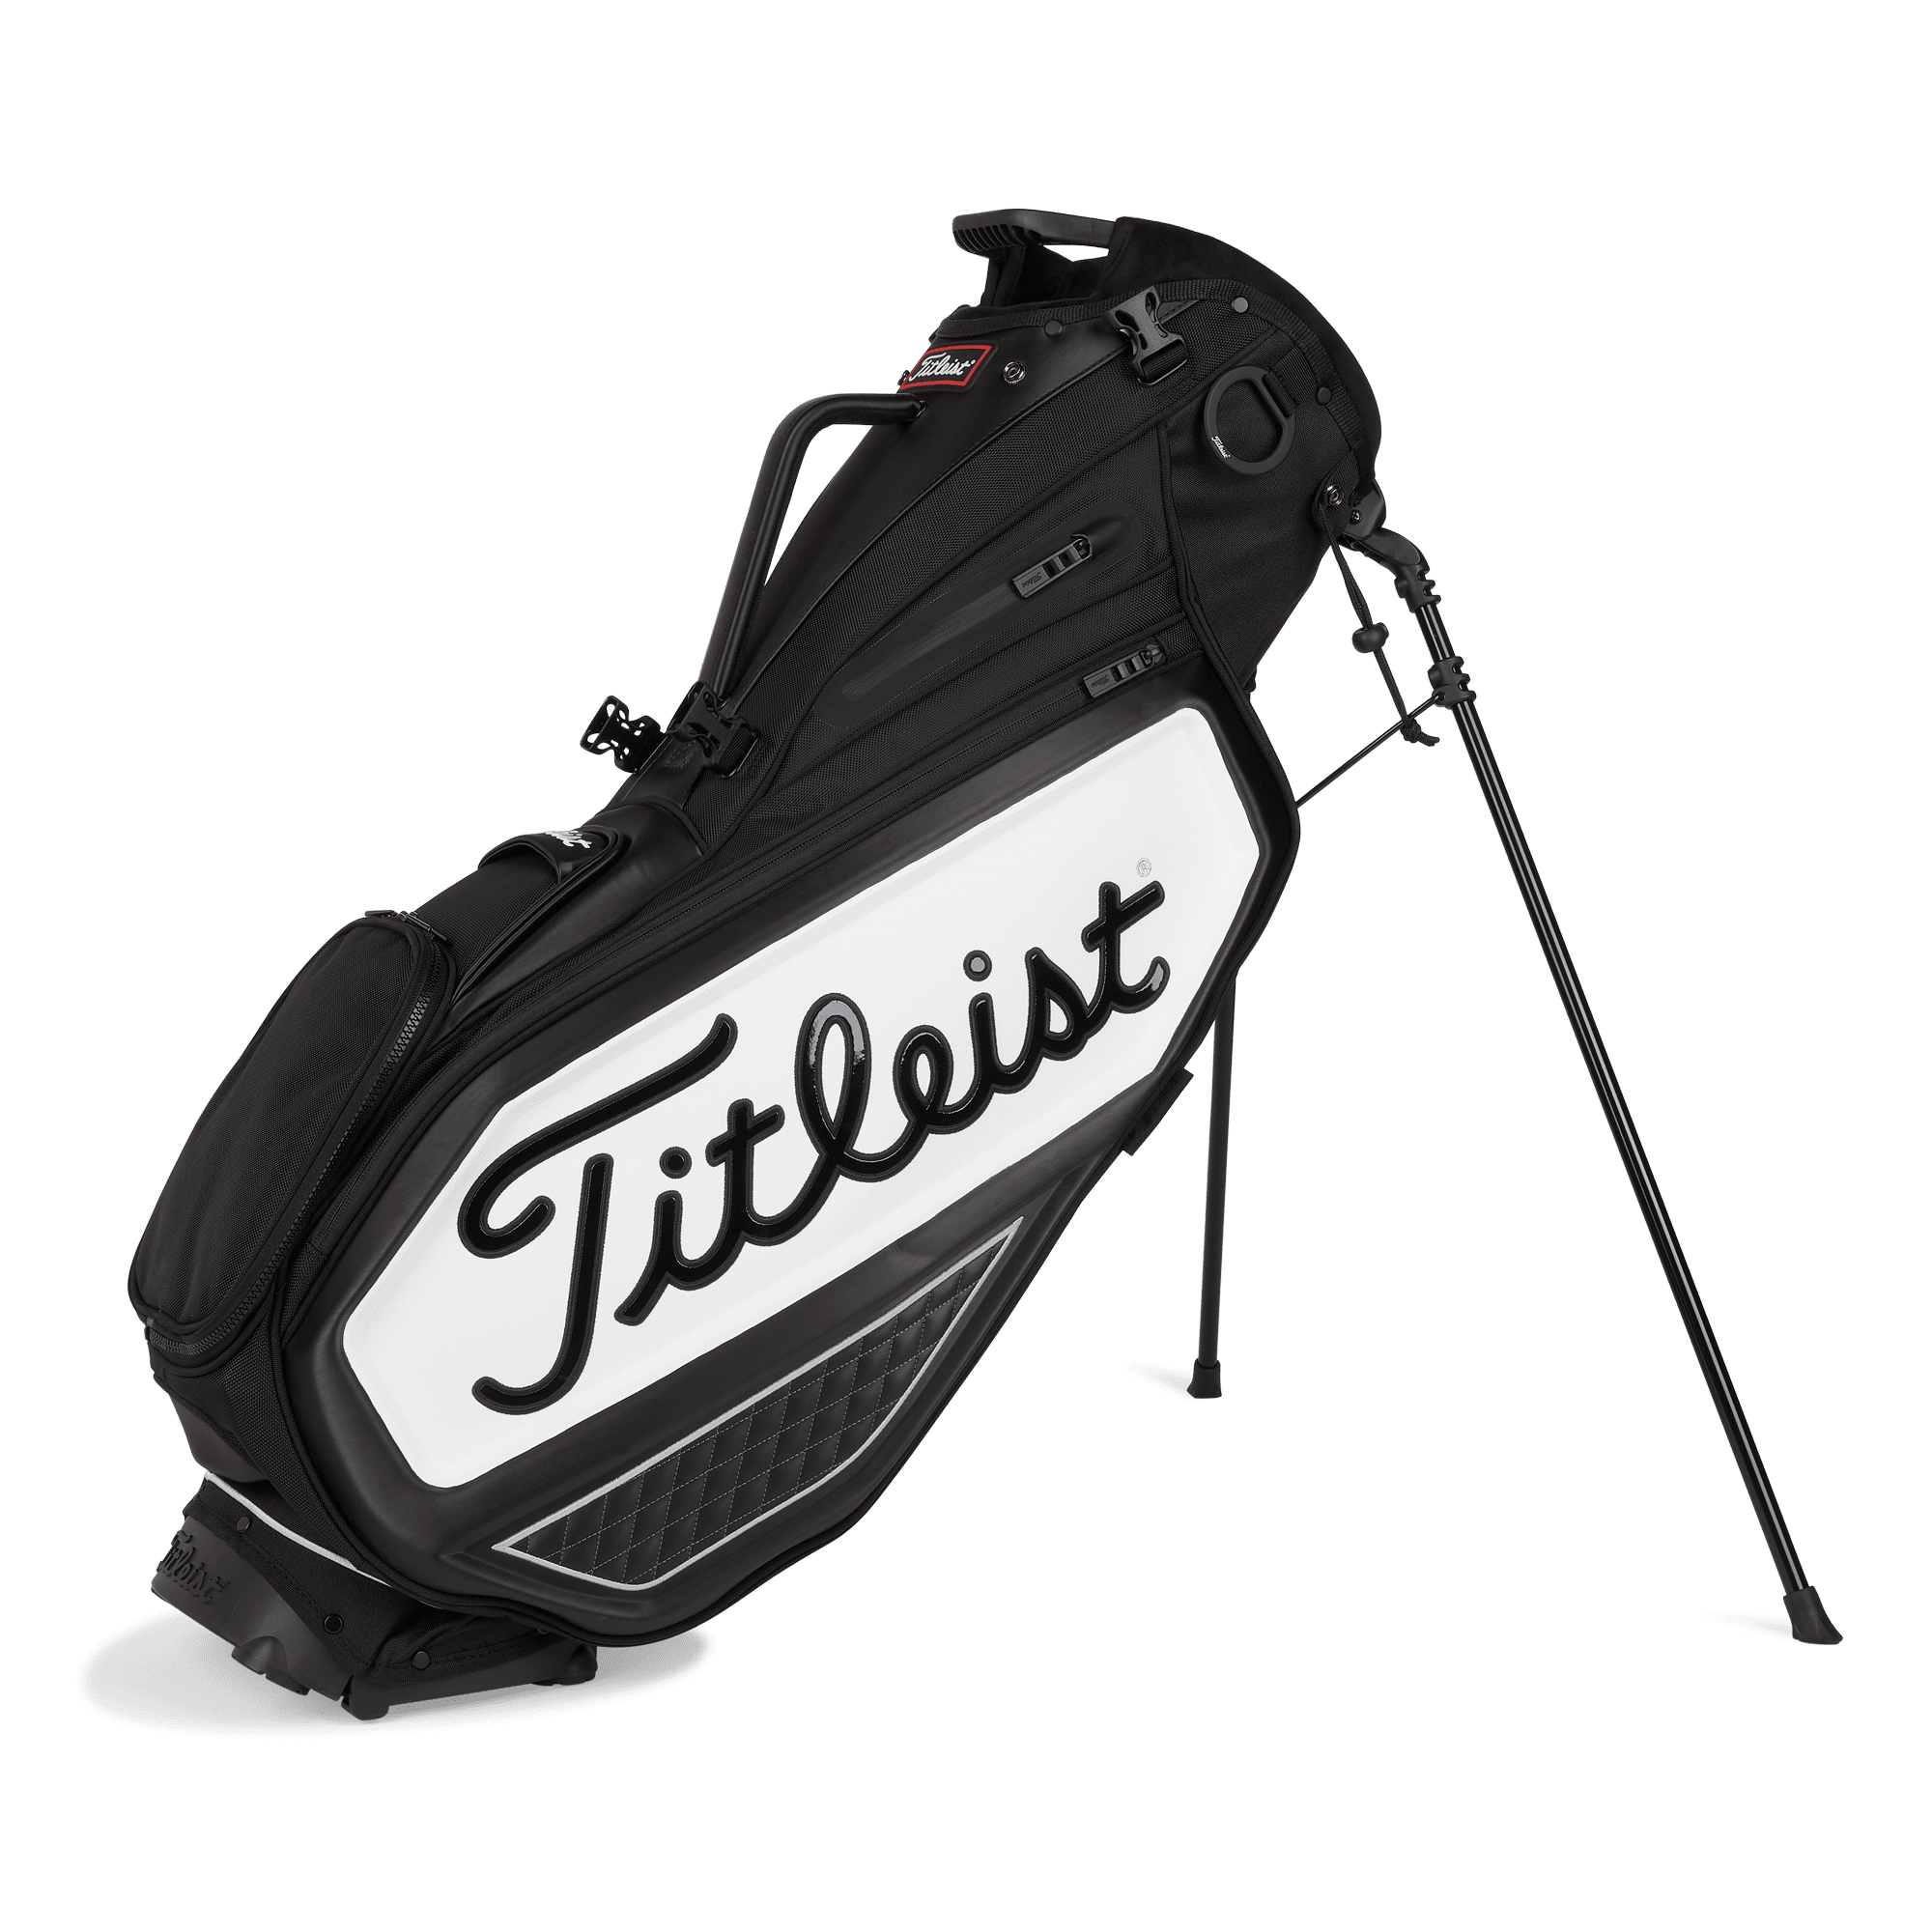 Cart bag stand bag or carry bag What you need to know for golf bags